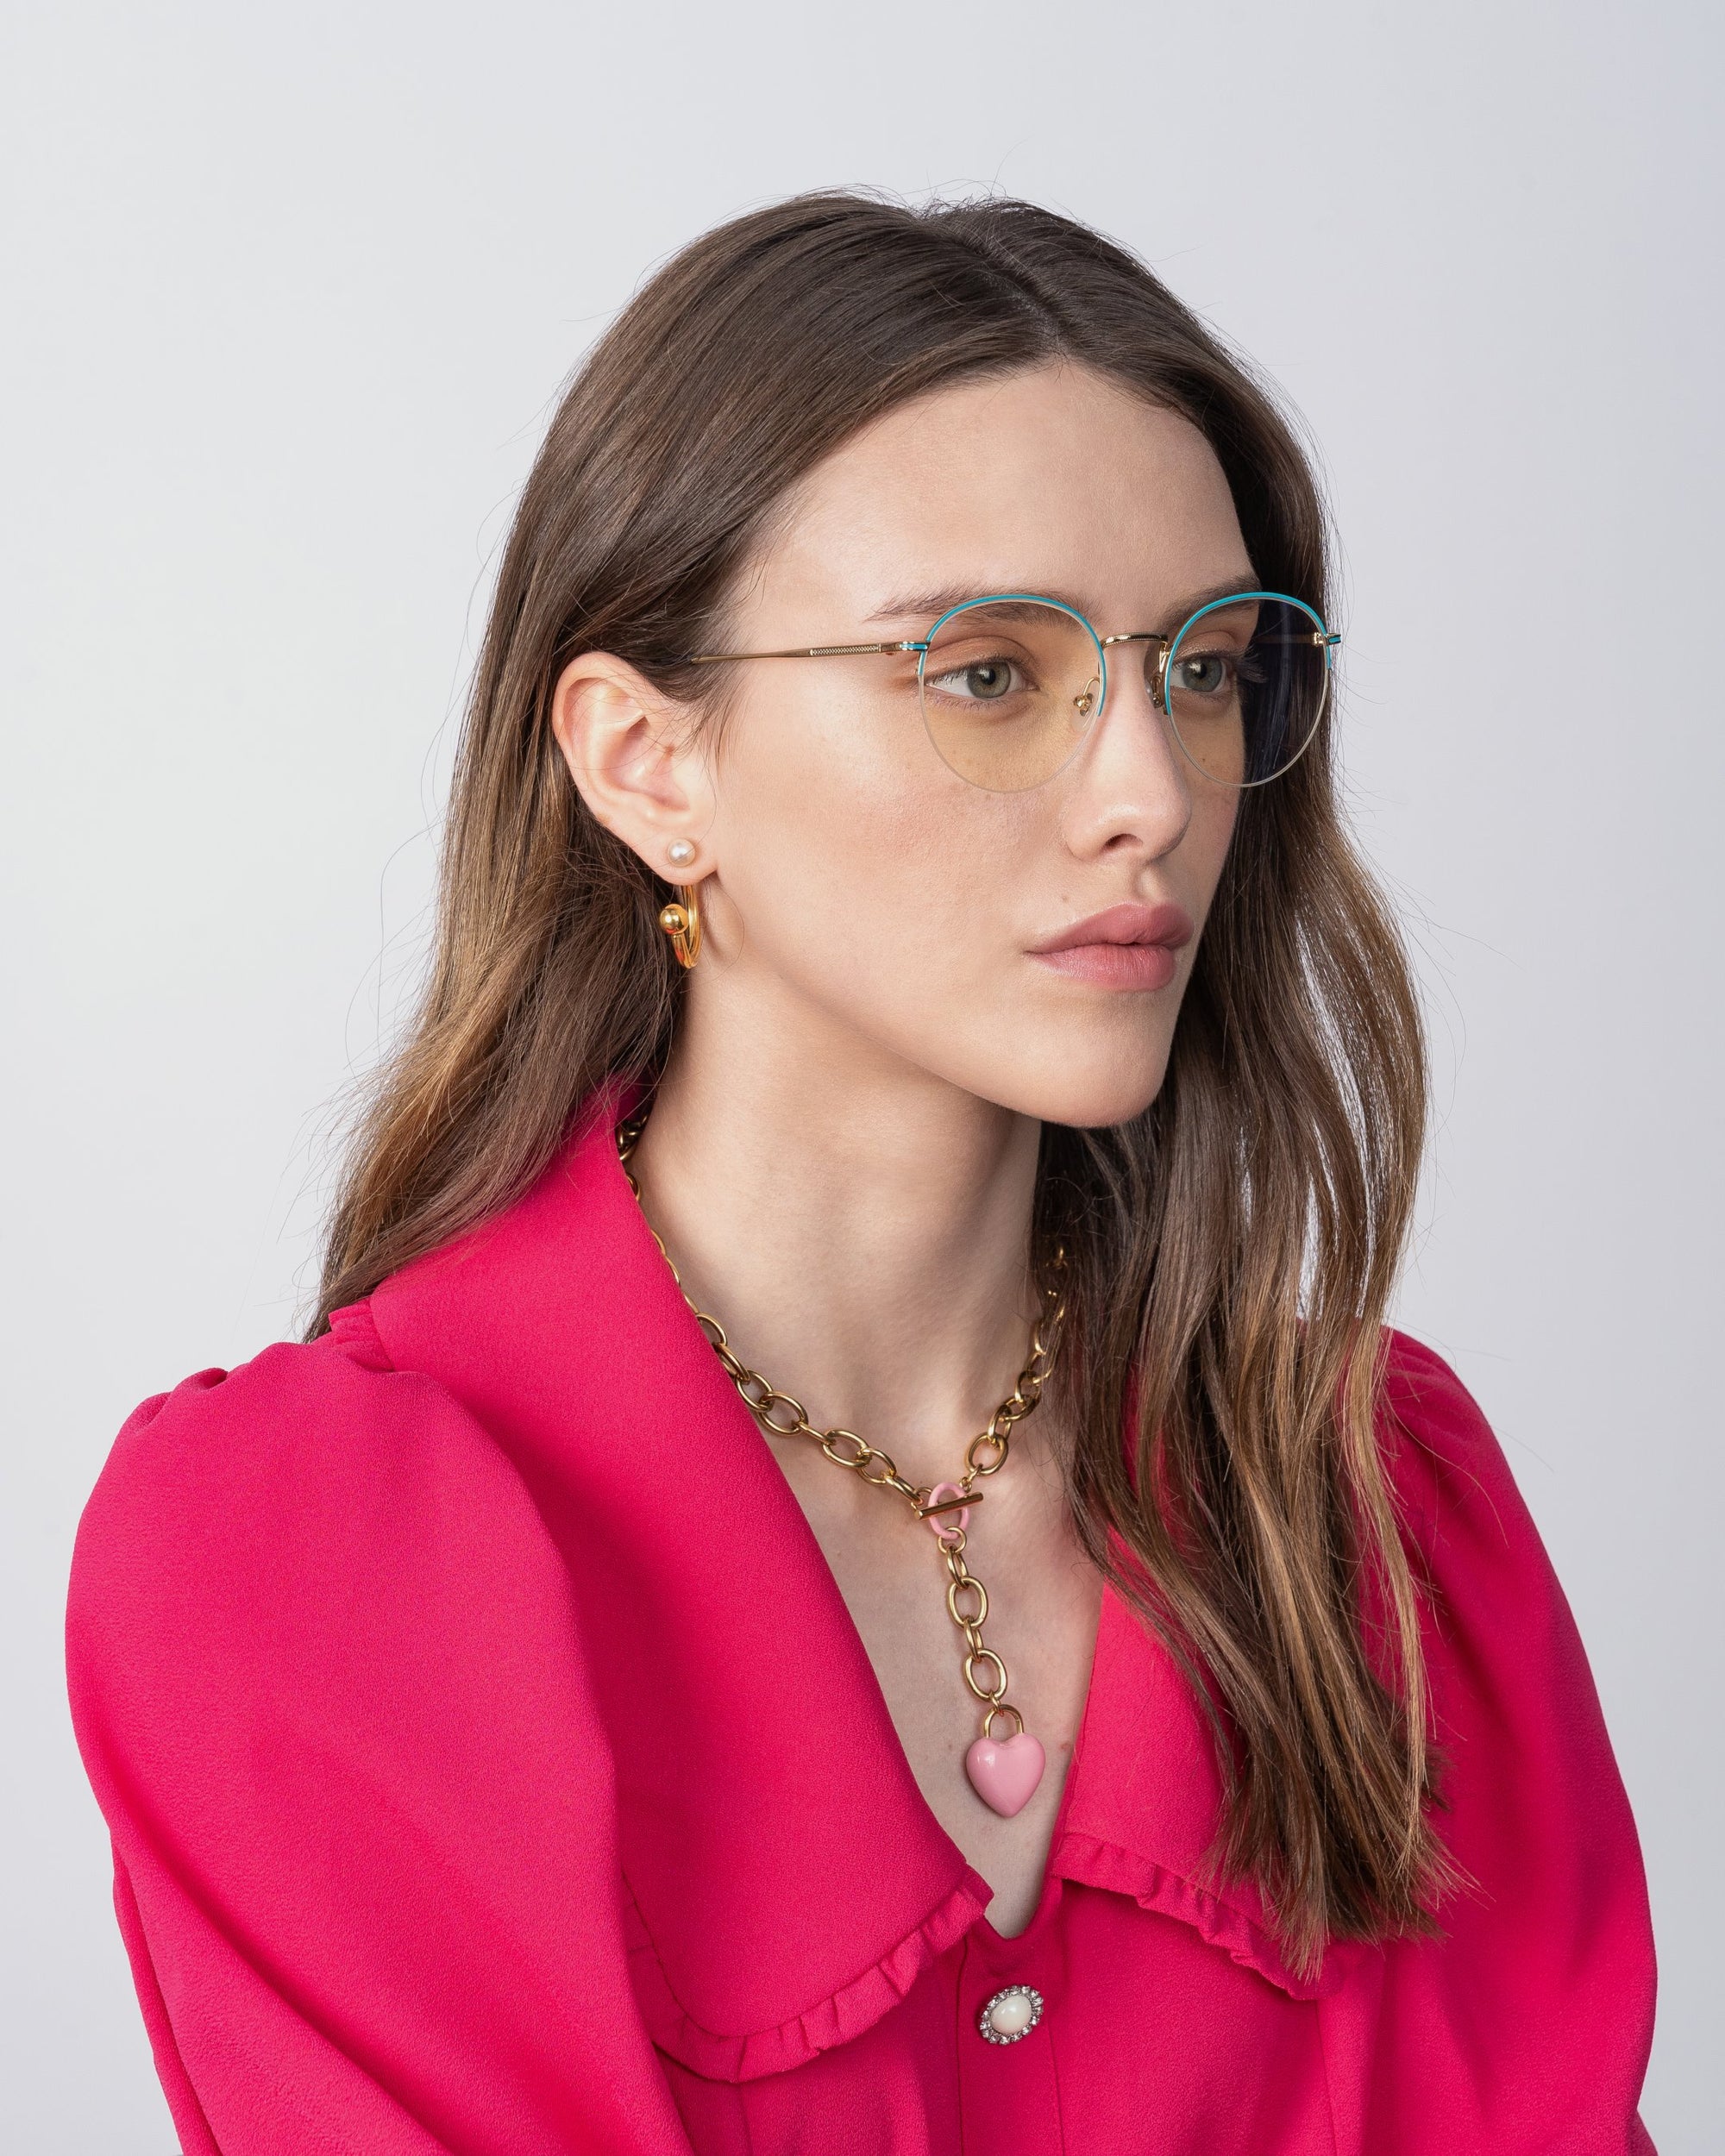 A woman with long, brown hair is wearing For Art&#39;s Sake® Ivy glasses with blue light filter lenses, a bright pink blouse with puff sleeves, and a gold necklace with a pink heart pendant. She is looking slightly to the side with a neutral expression against a plain white background.